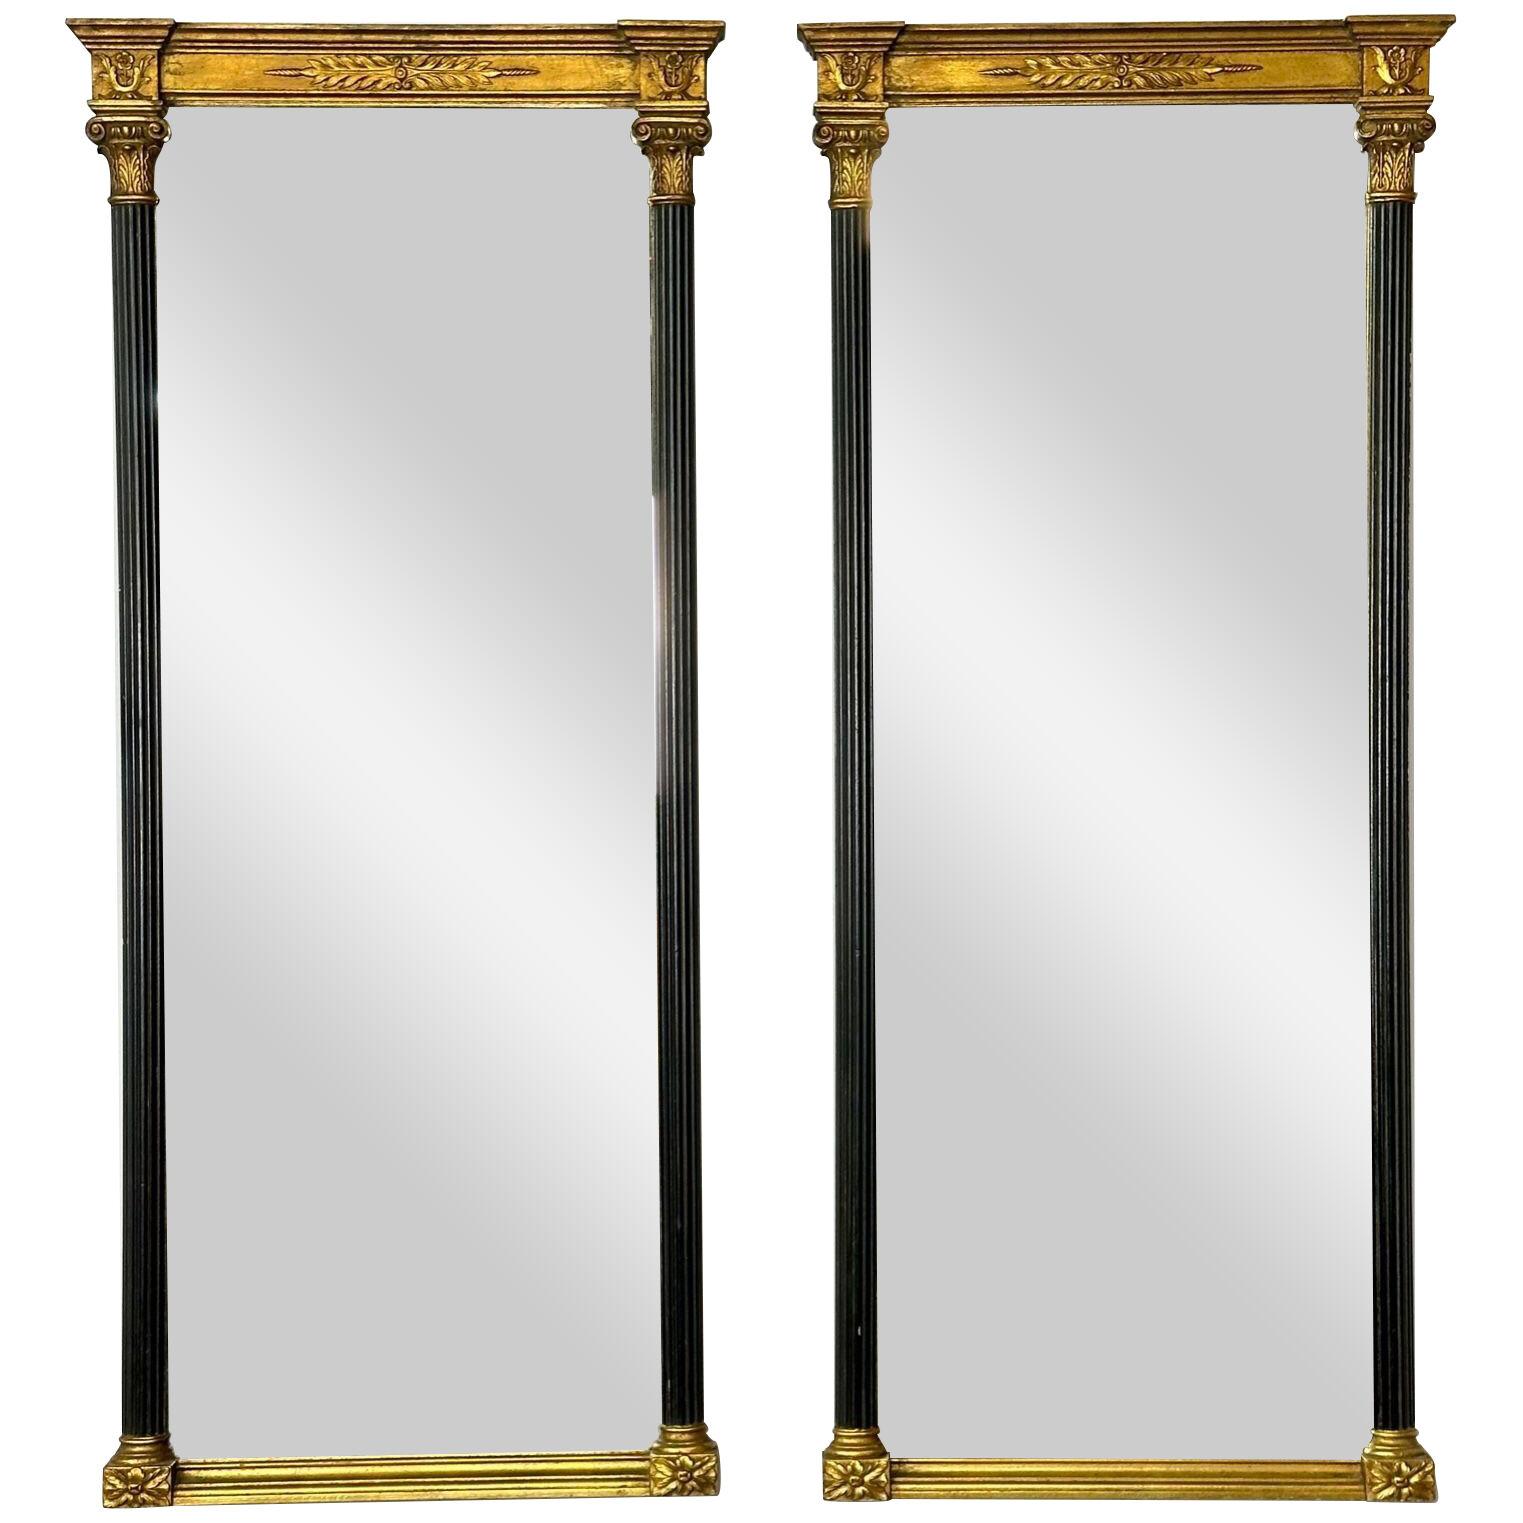 Pair of Gilt Gold and Ebony Wall, Console or Pier Mirrors